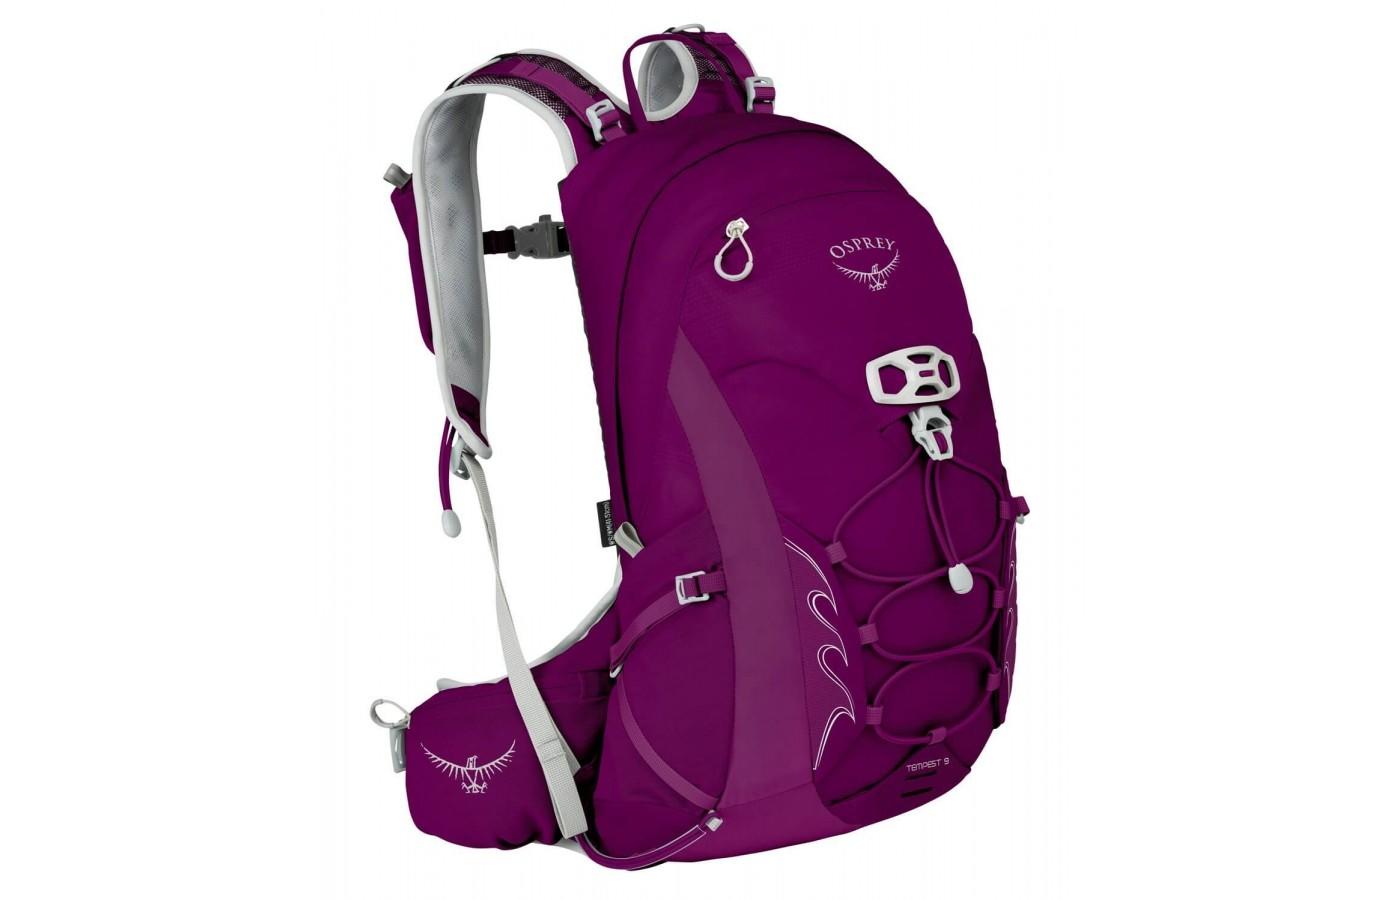 The Osprey Tempest 9 is a lightweight, versatile day pack. 